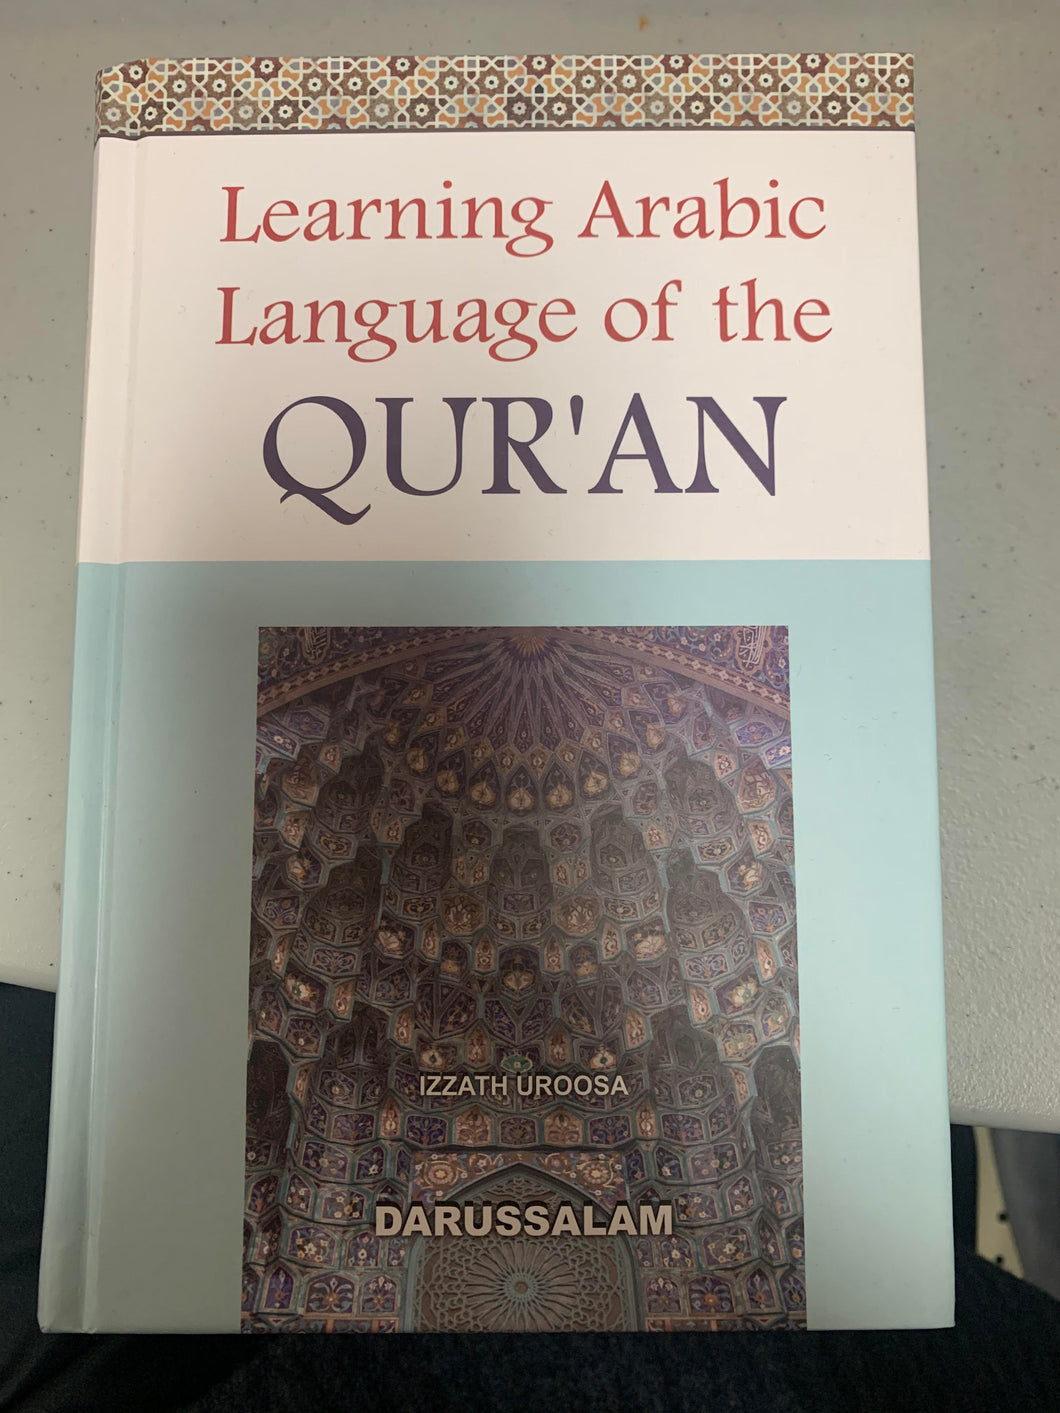 Learning Arabic language of the Quran